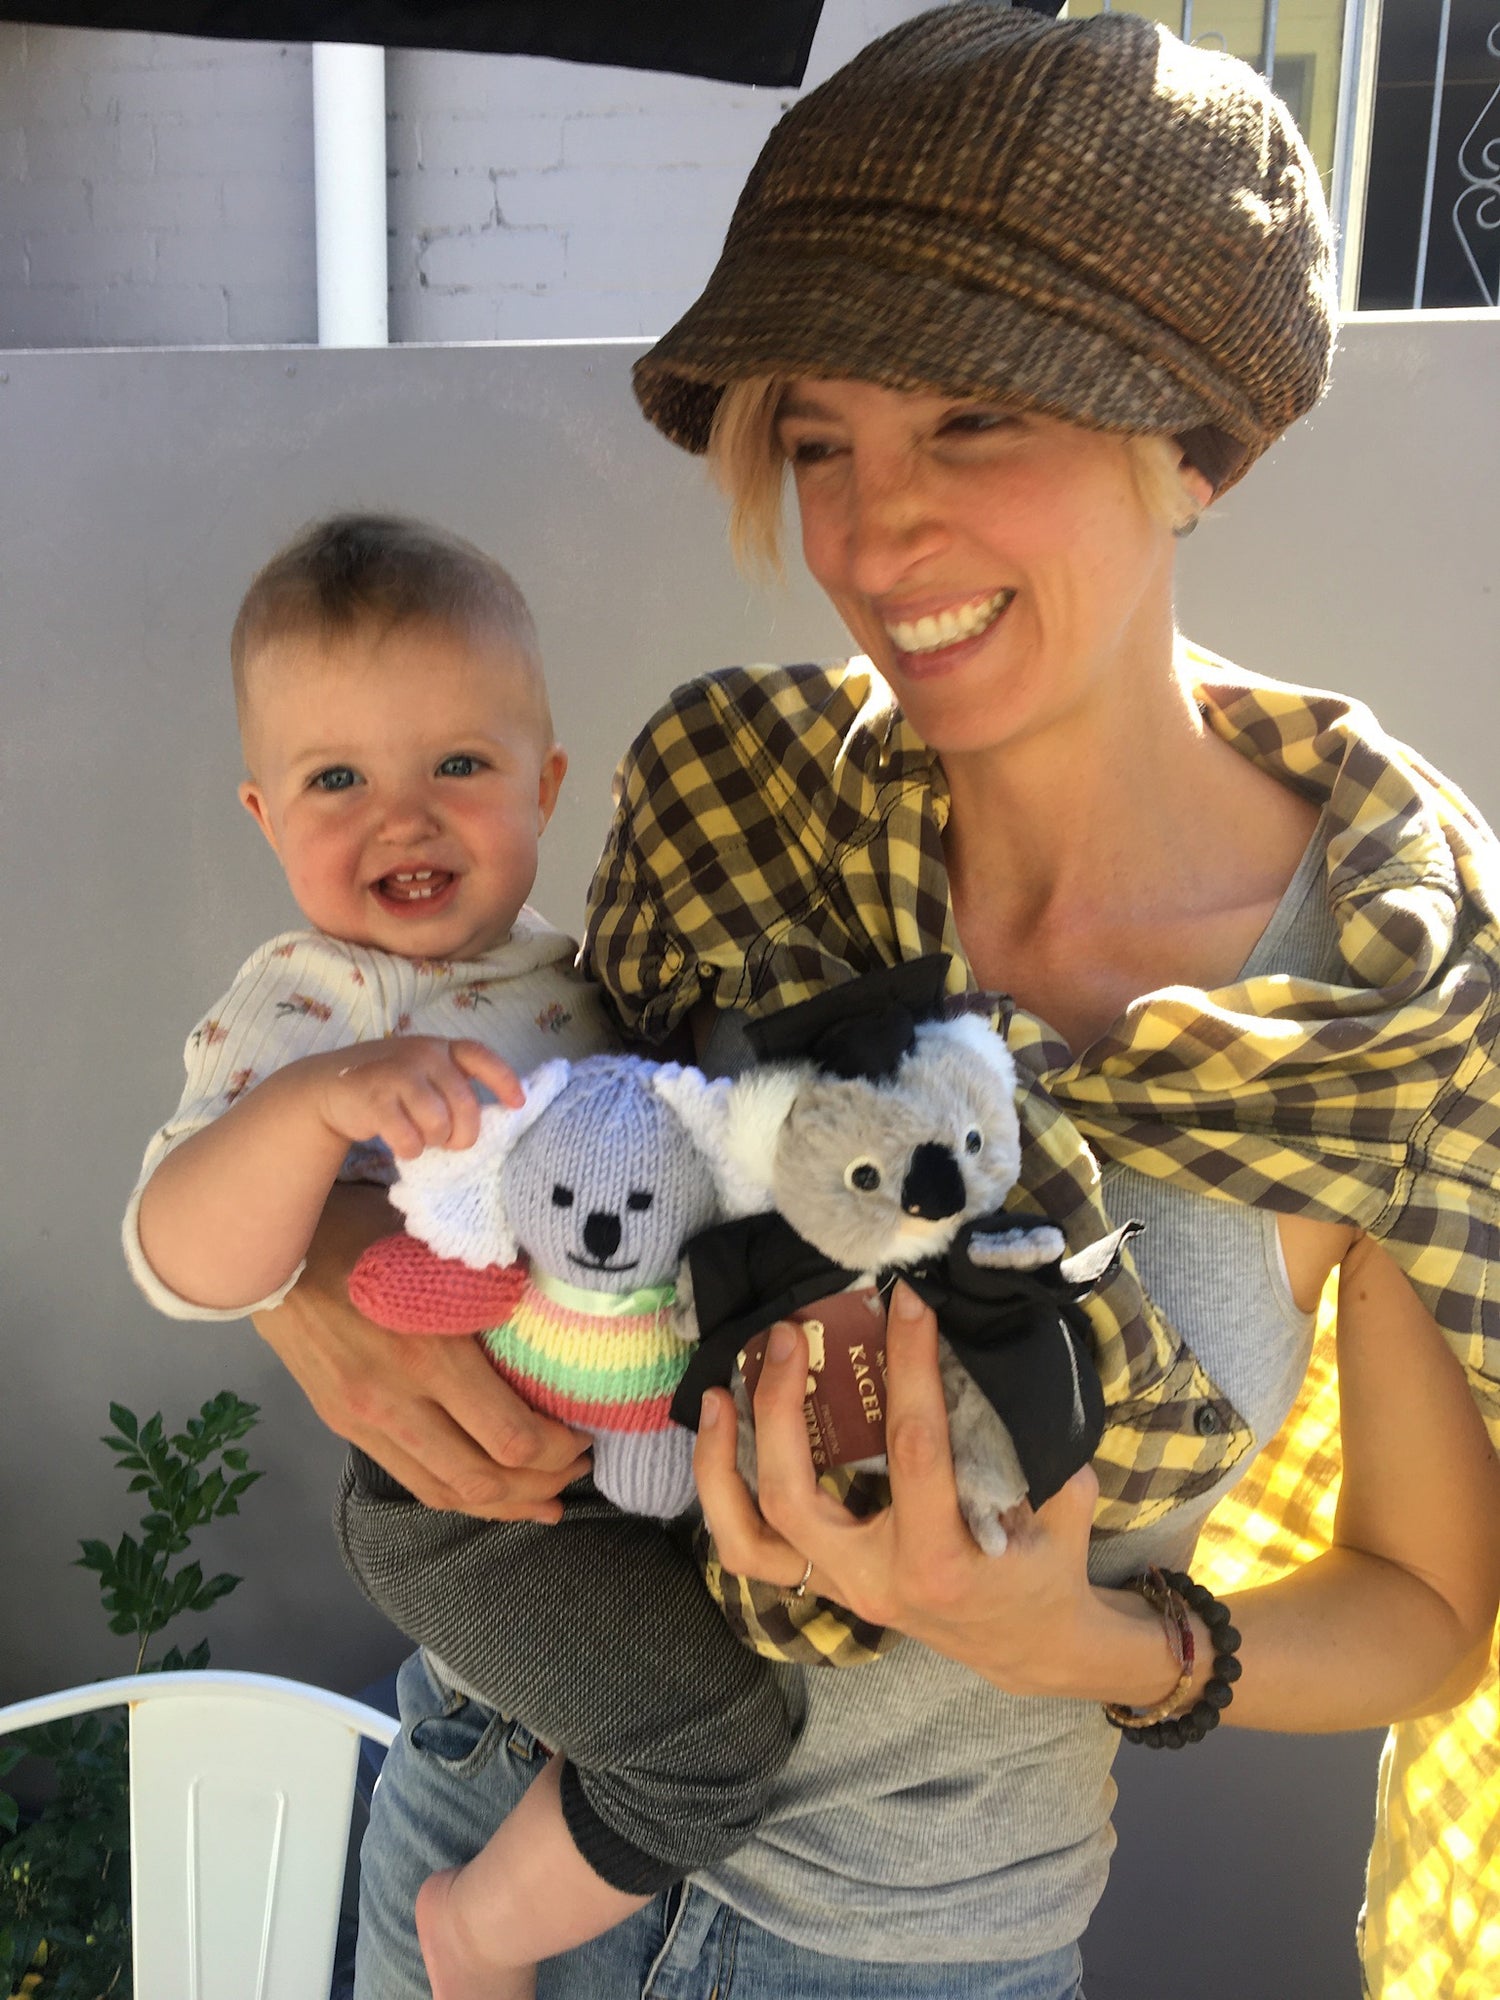 Owner Juliet wearing hat with hair, holding baby daughter